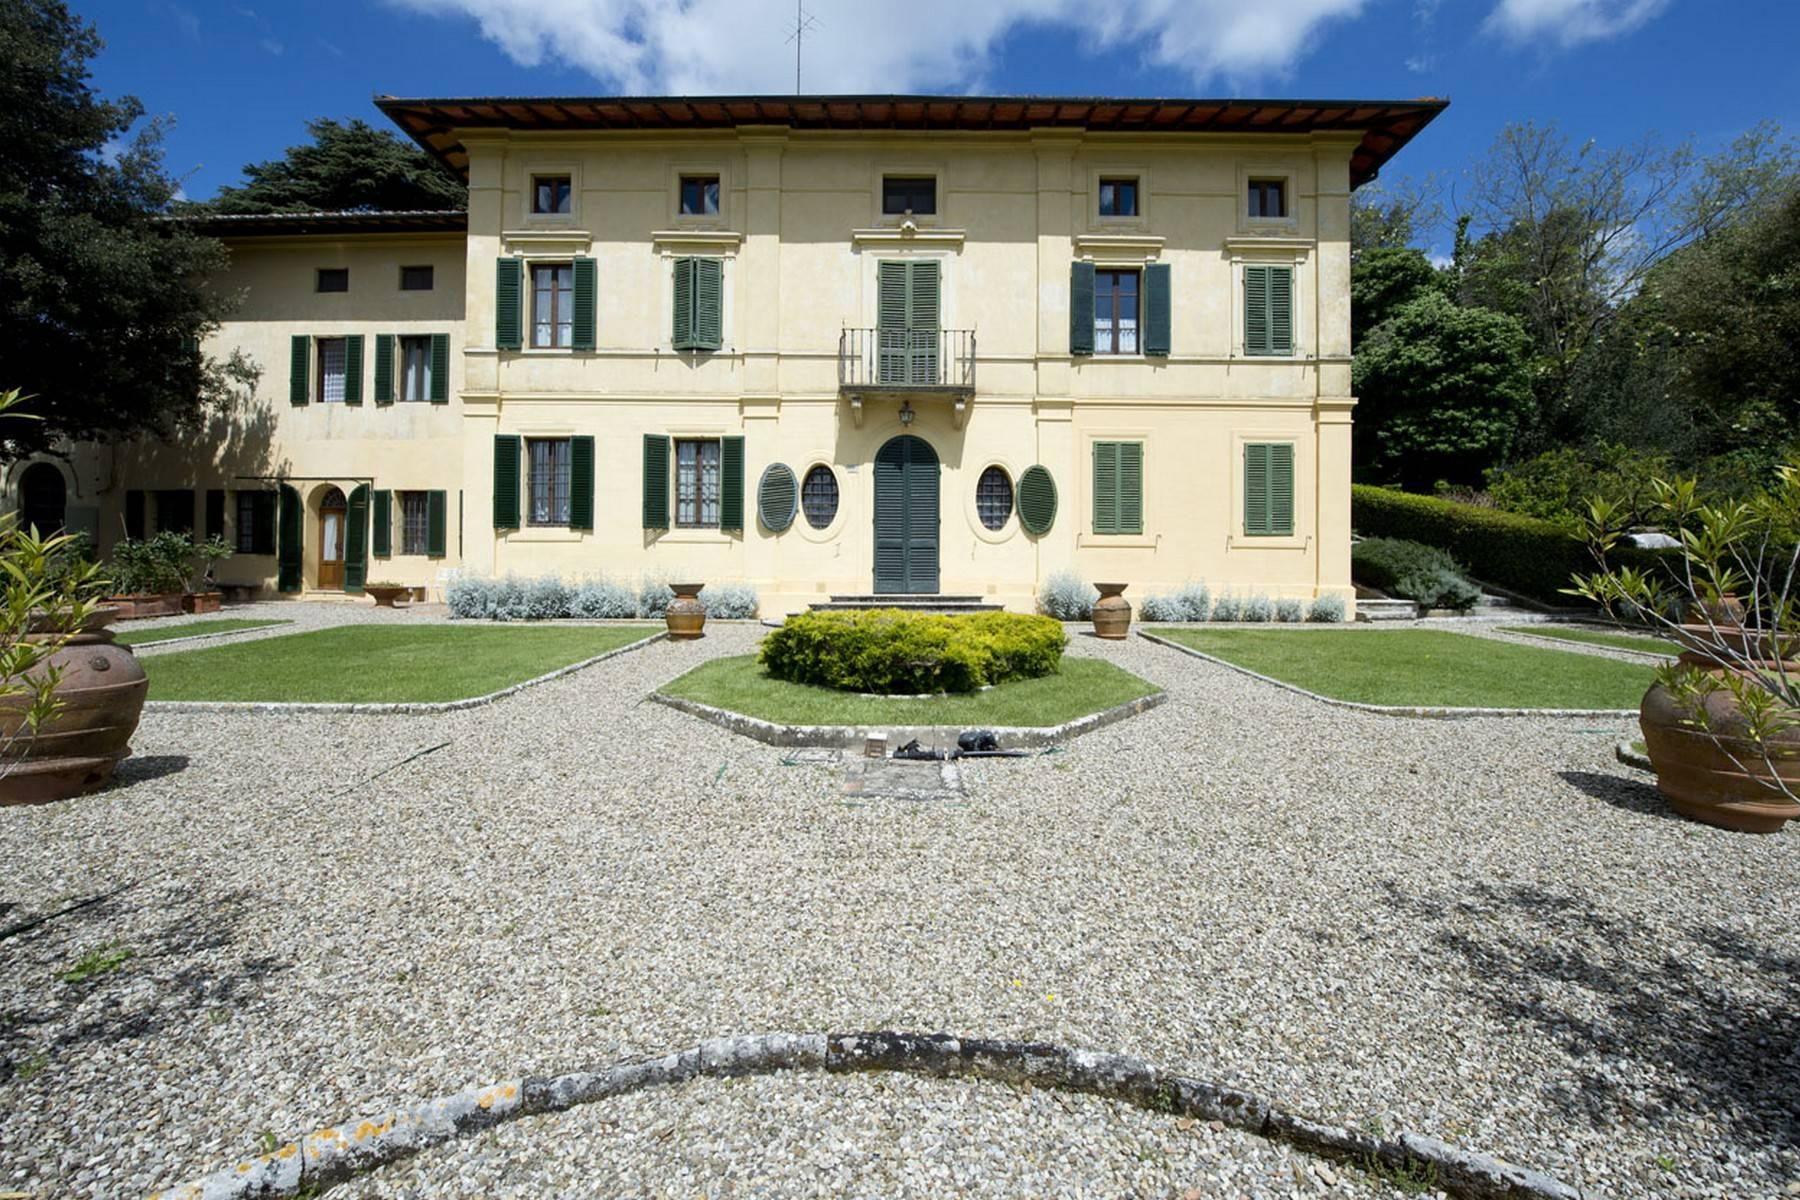 Aristocratic Villa for Sale on the Hills of Siena - 1